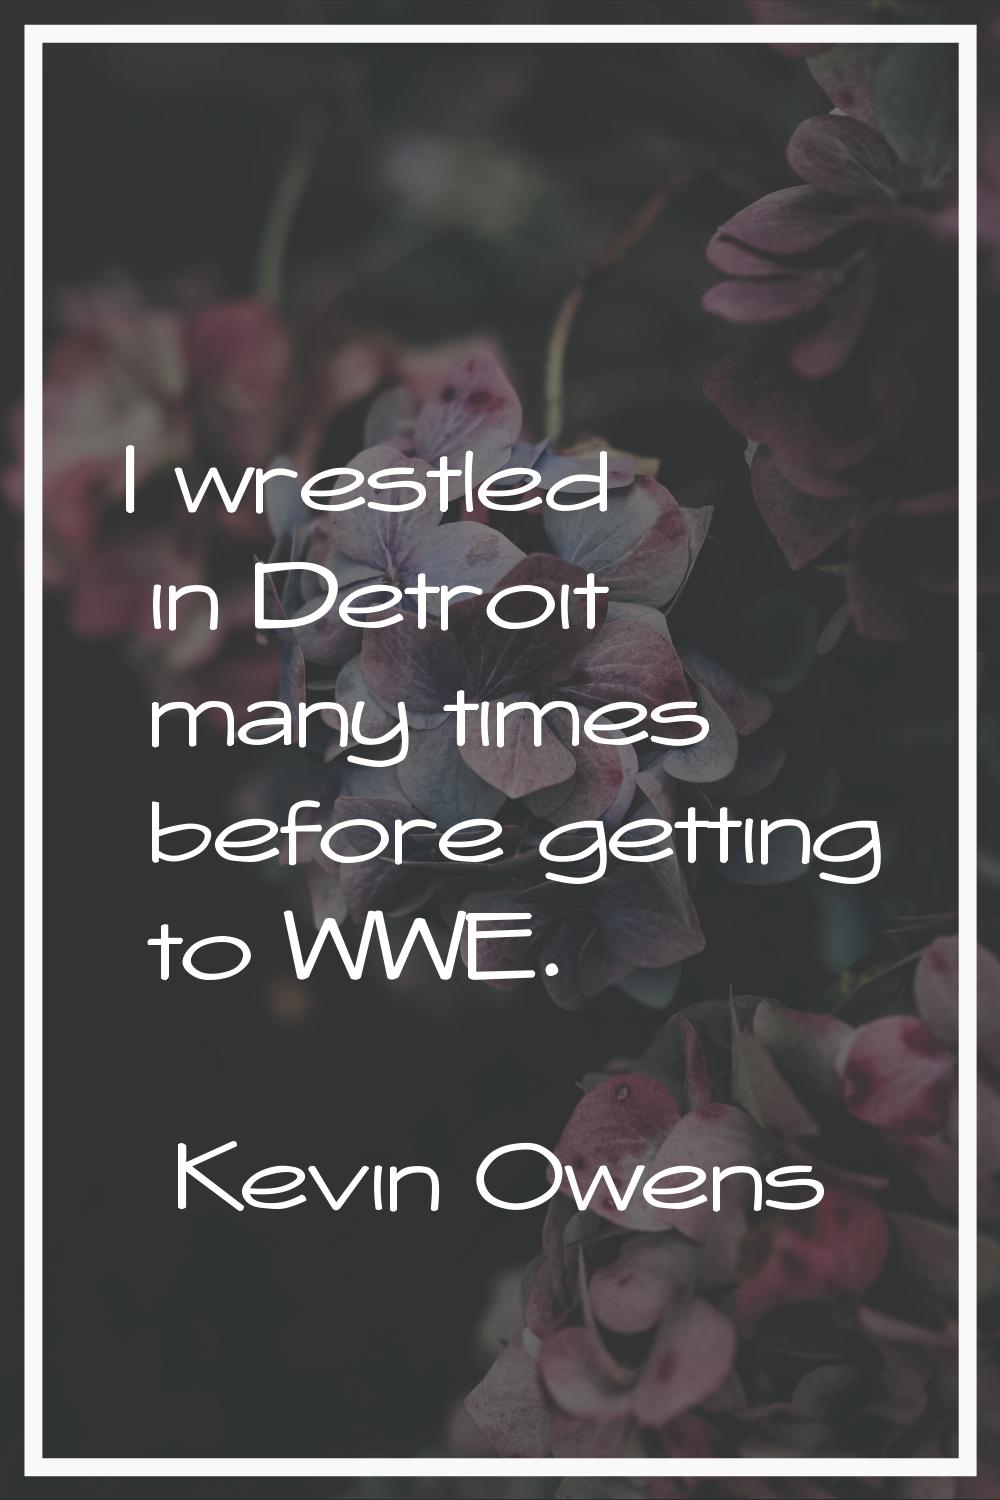 I wrestled in Detroit many times before getting to WWE.